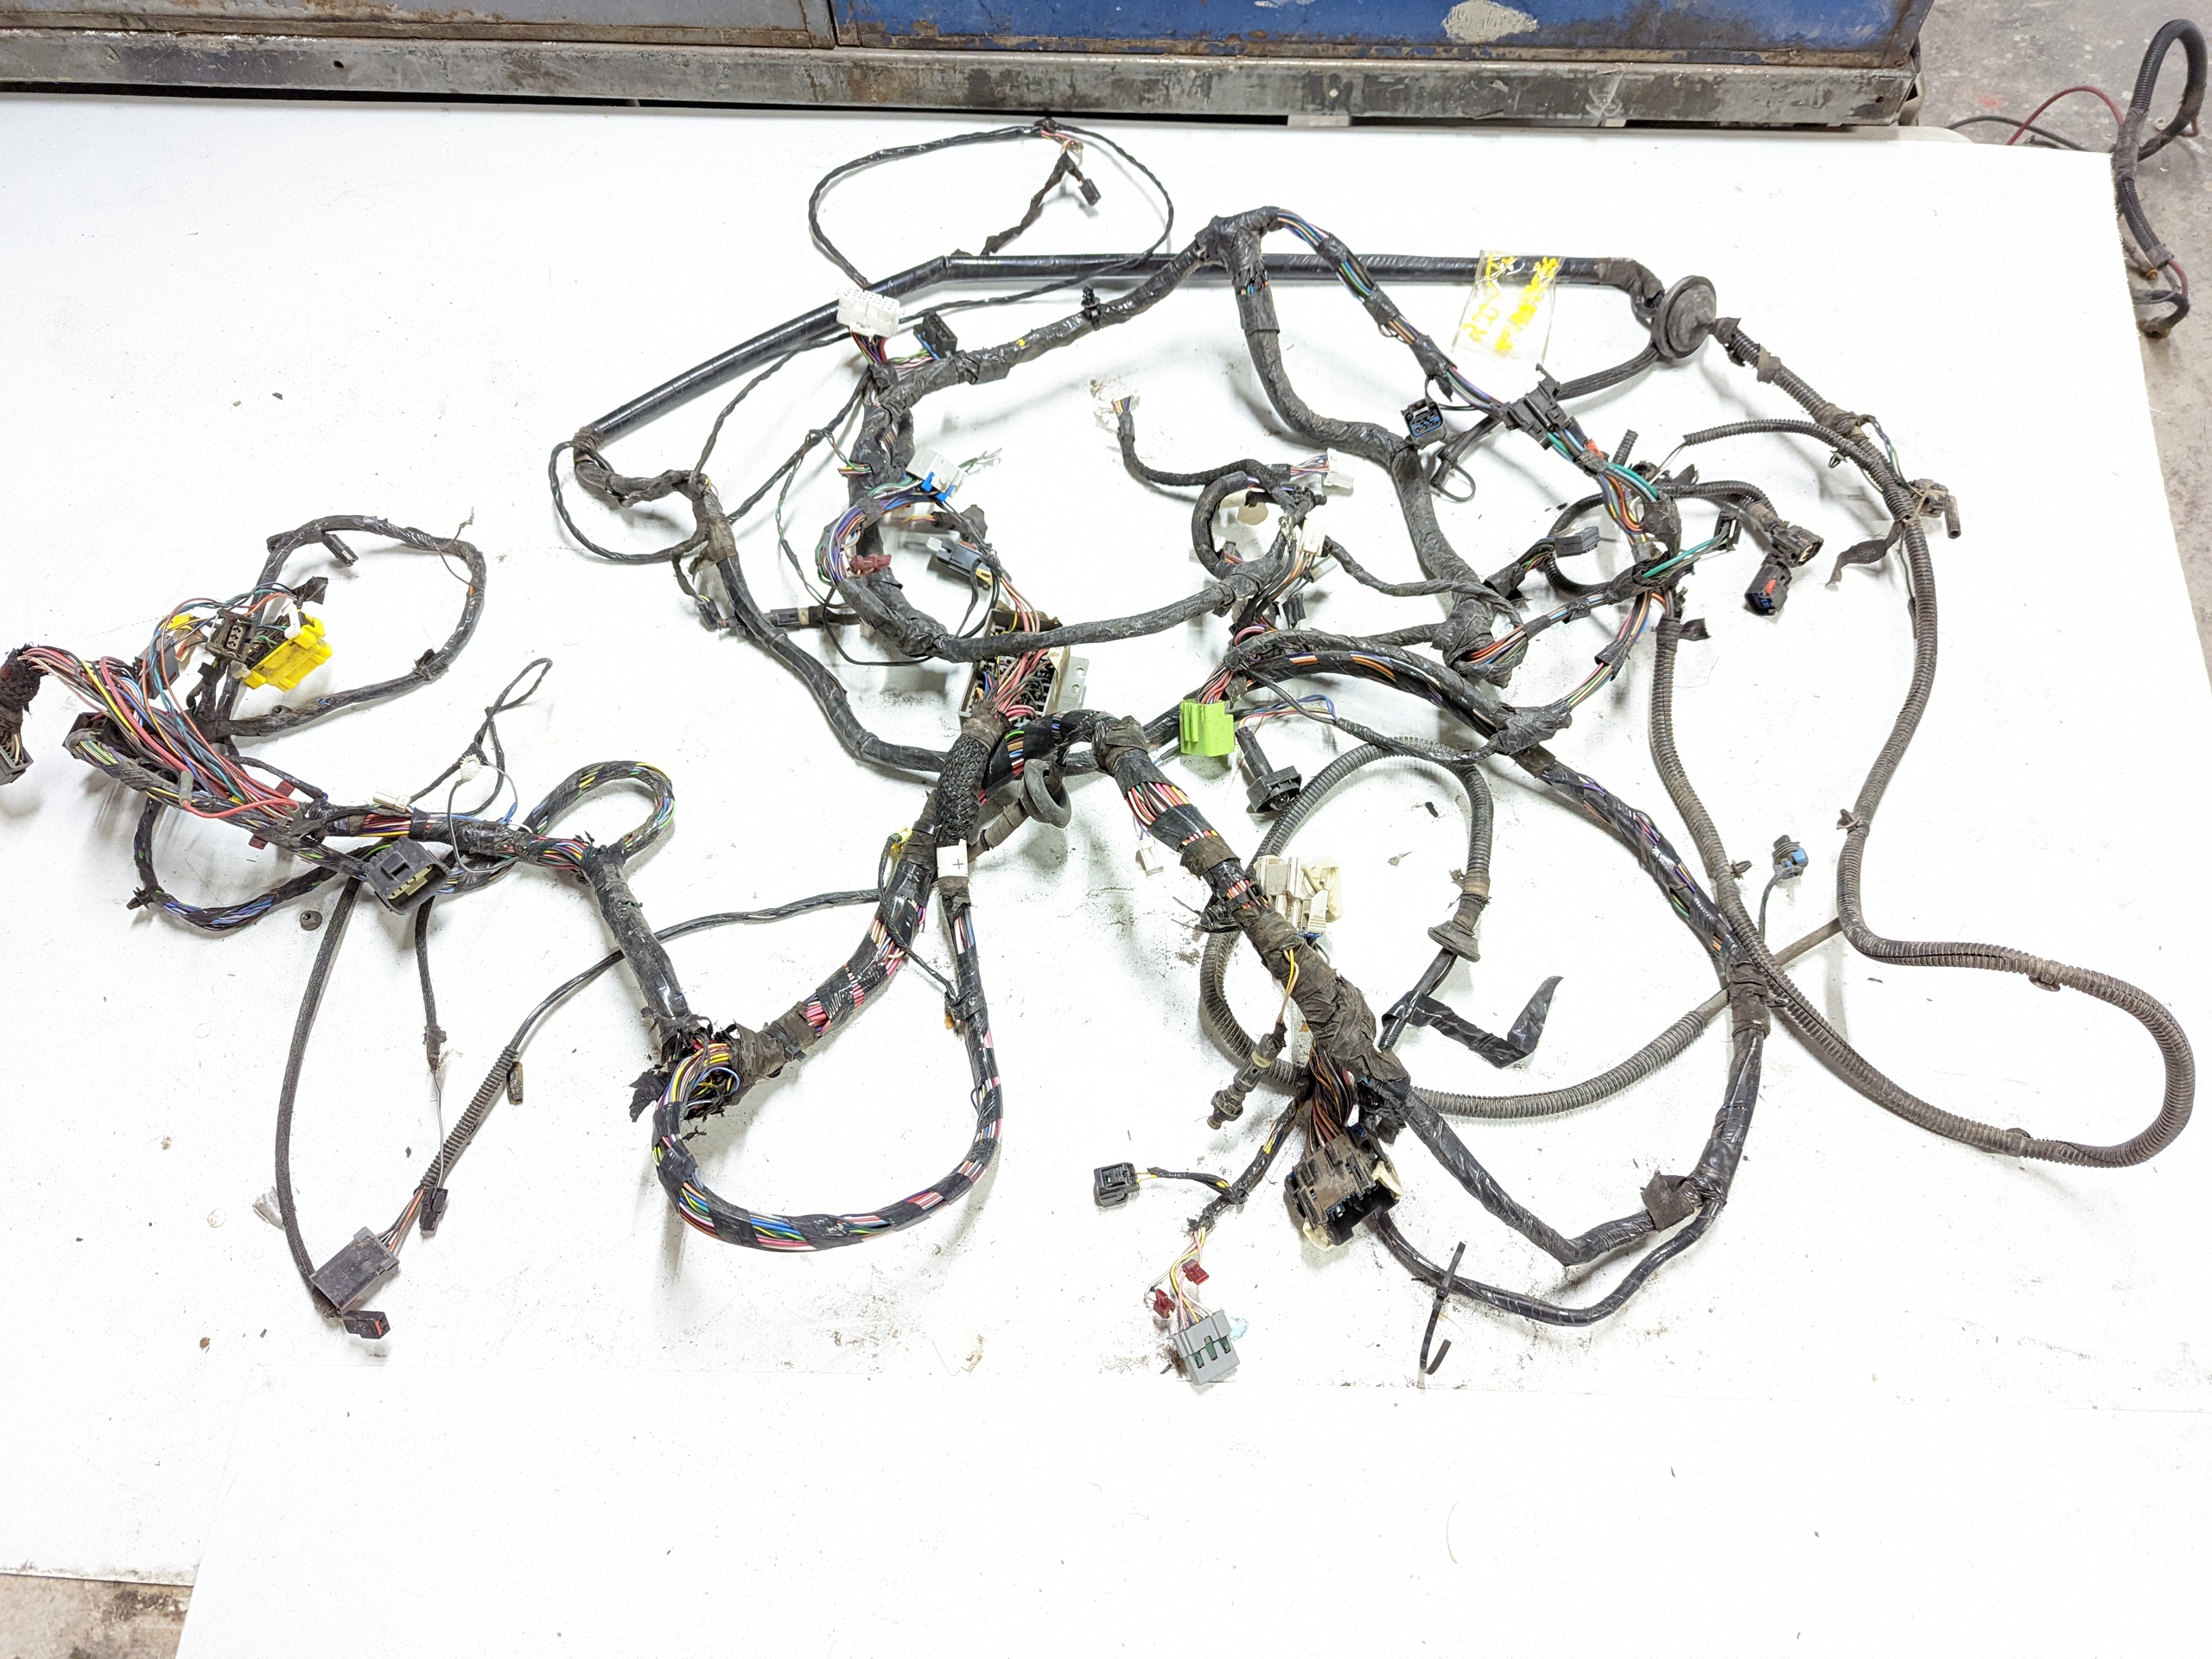 2004 Hard Top Wiring Harness Kit with Instrument Dash 56047212AC and Rear Body 56047164AD